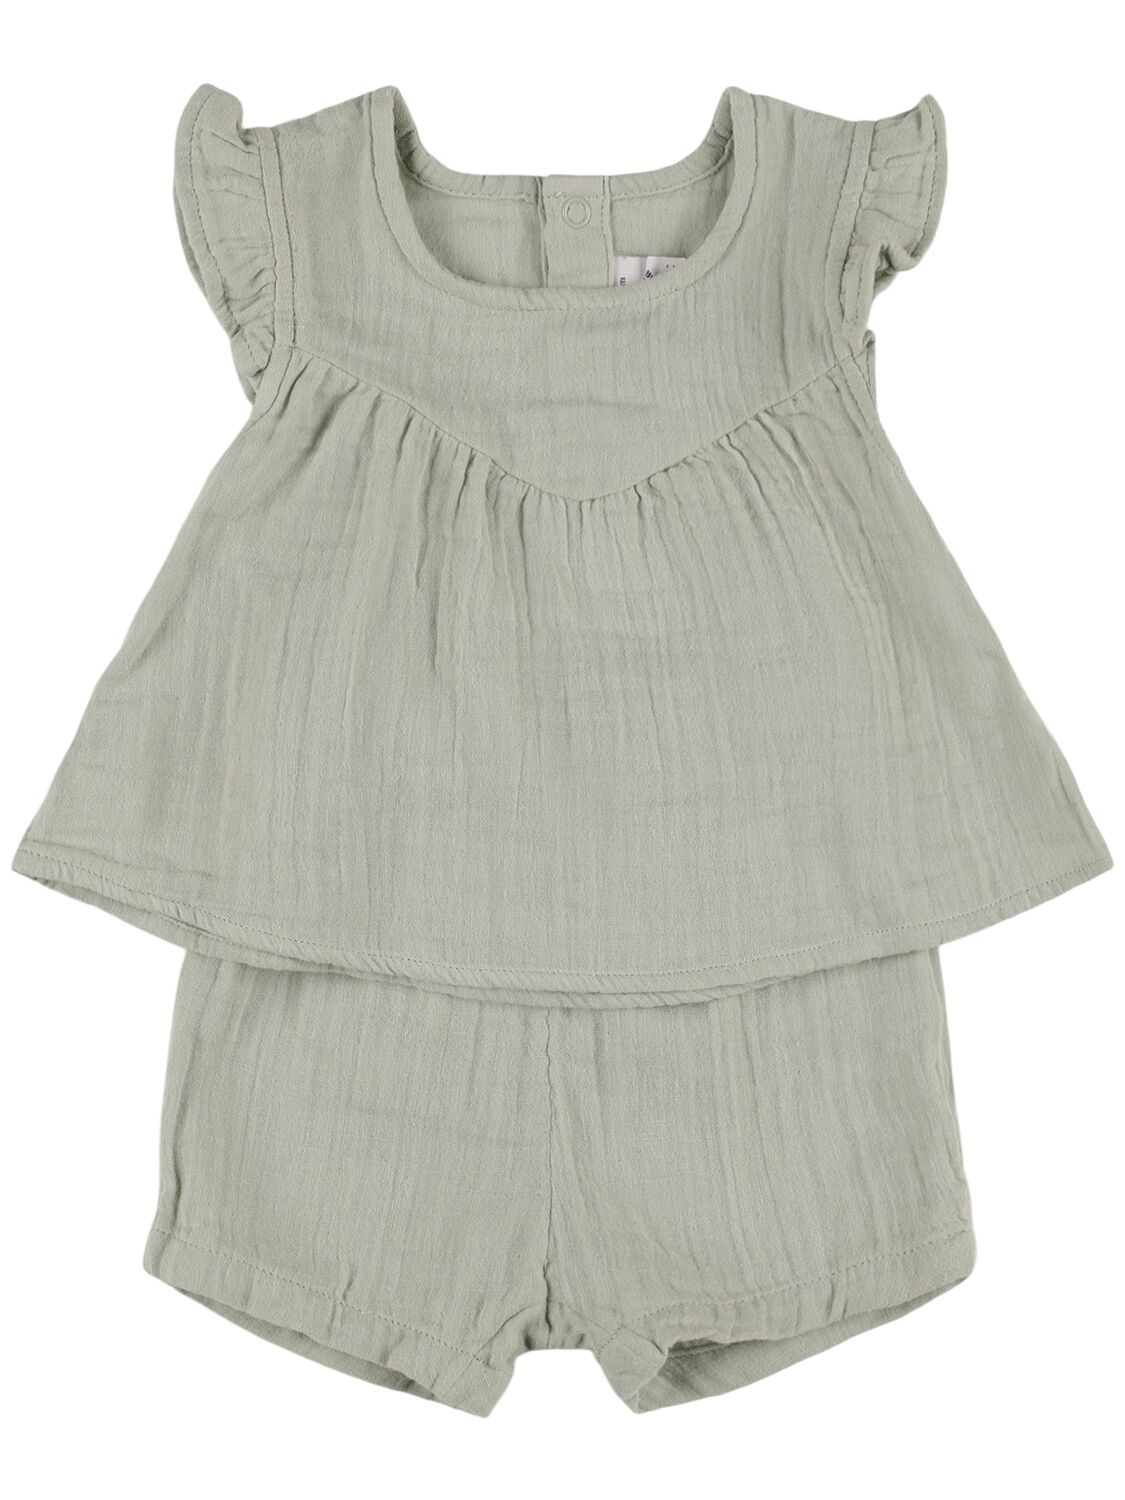 Image of Cotton Top & Shorts